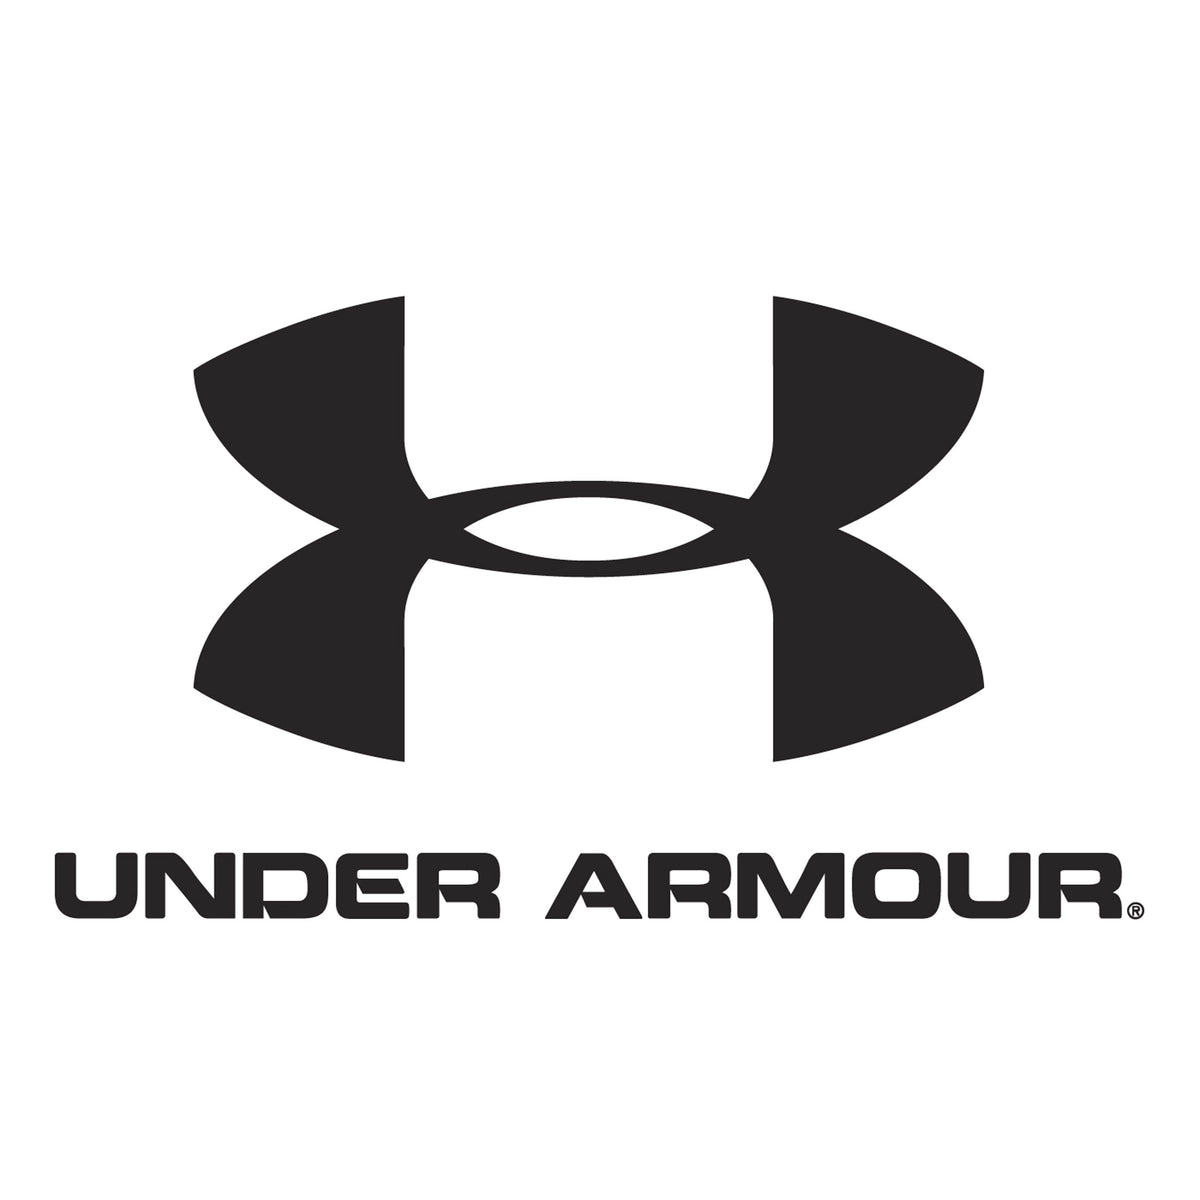 Under Armour – Cowing Robards Sports